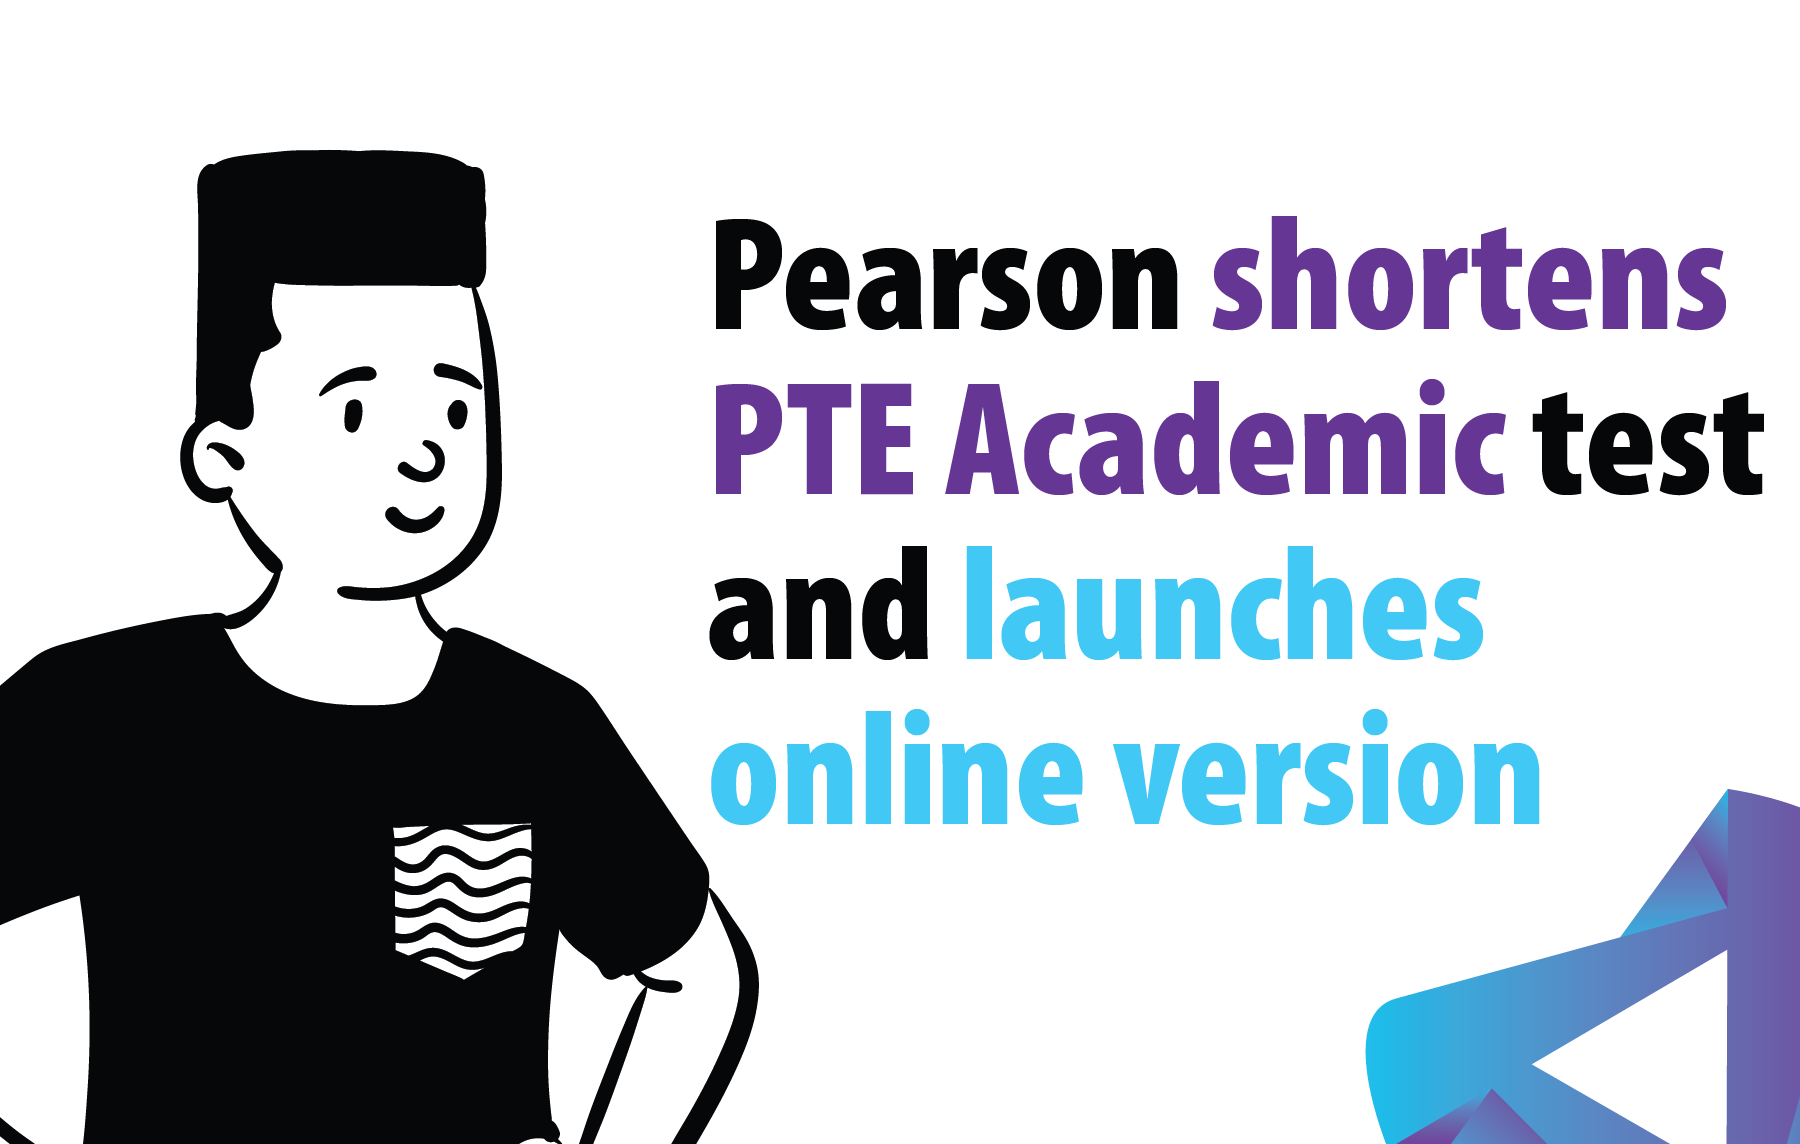 Apical Blog - Pearson shortens PTE Academic test and launches online version